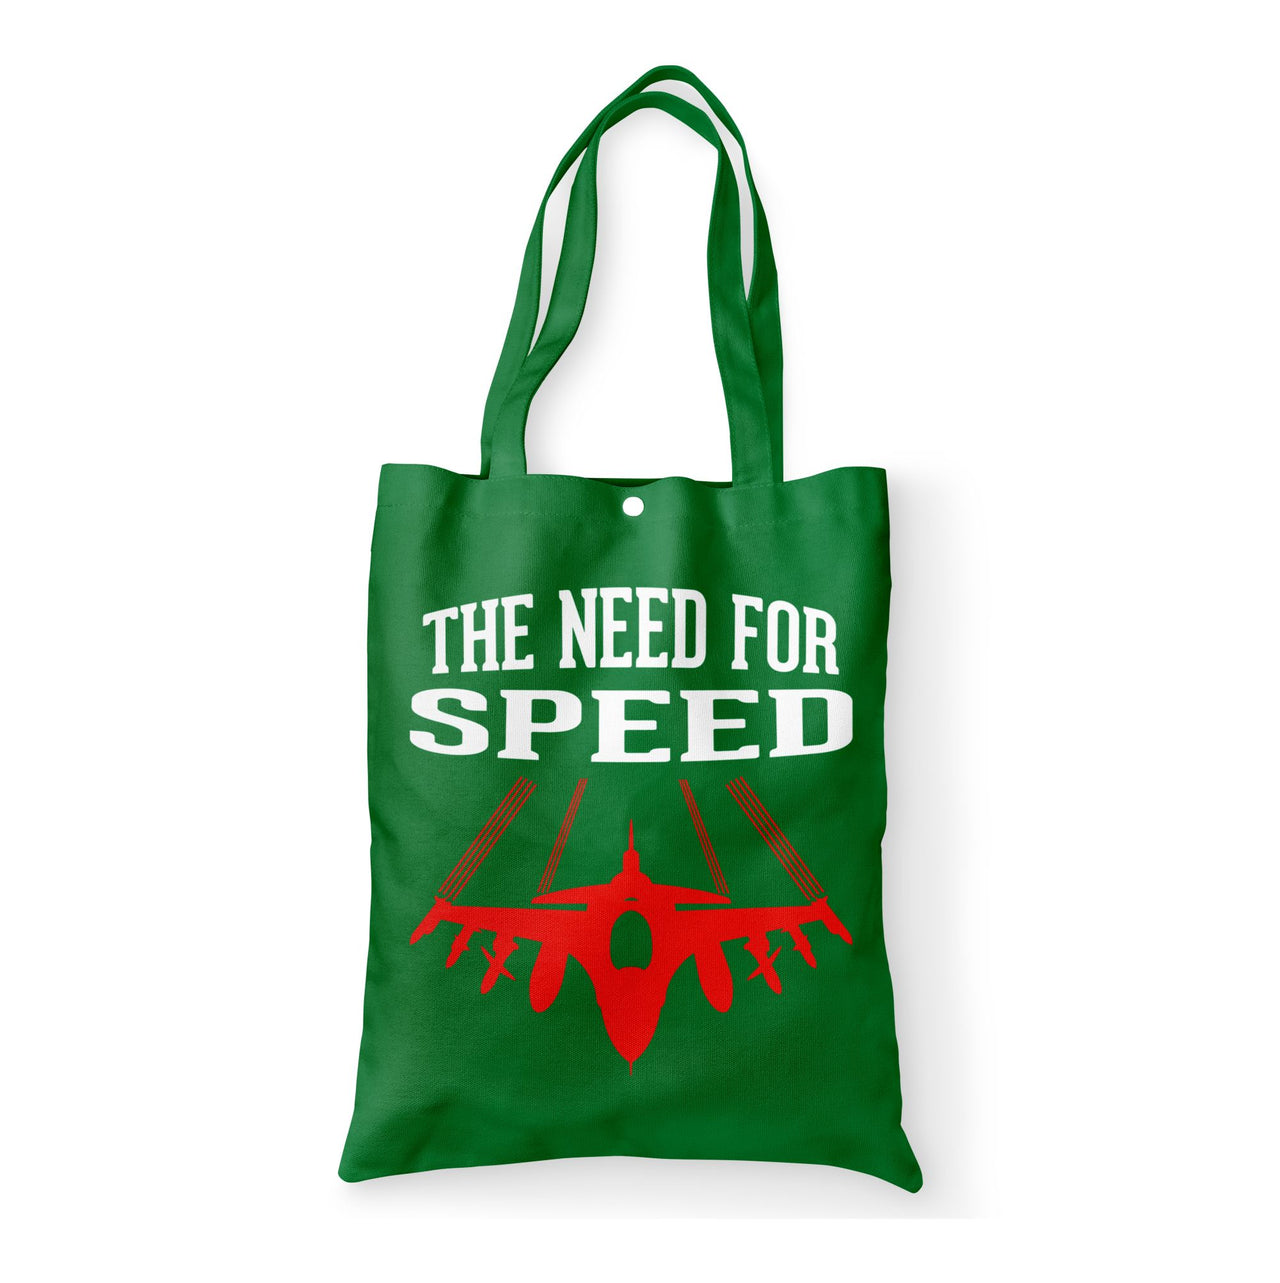 The Need For Speed Designed Tote Bags